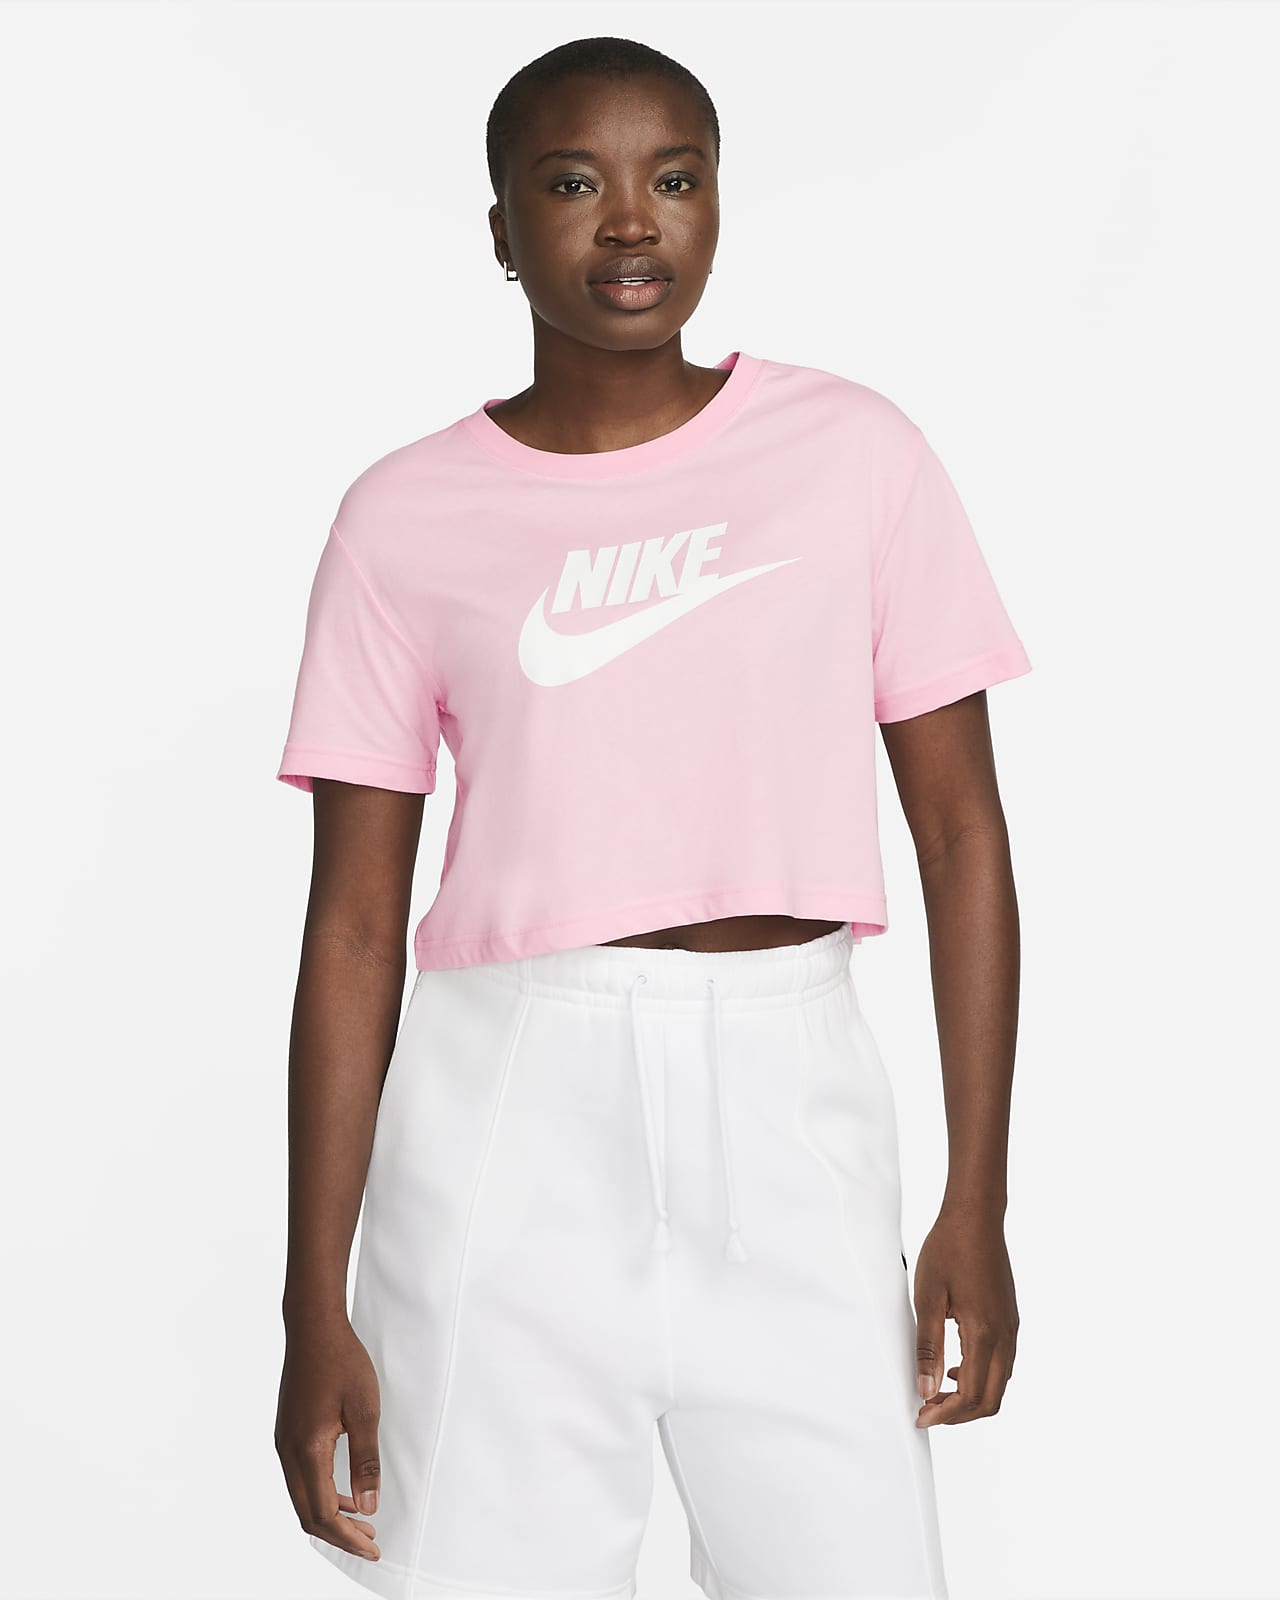 Expertise security on Nike Sportswear Essential Women's Cropped Logo T-Shirt. Nike.com